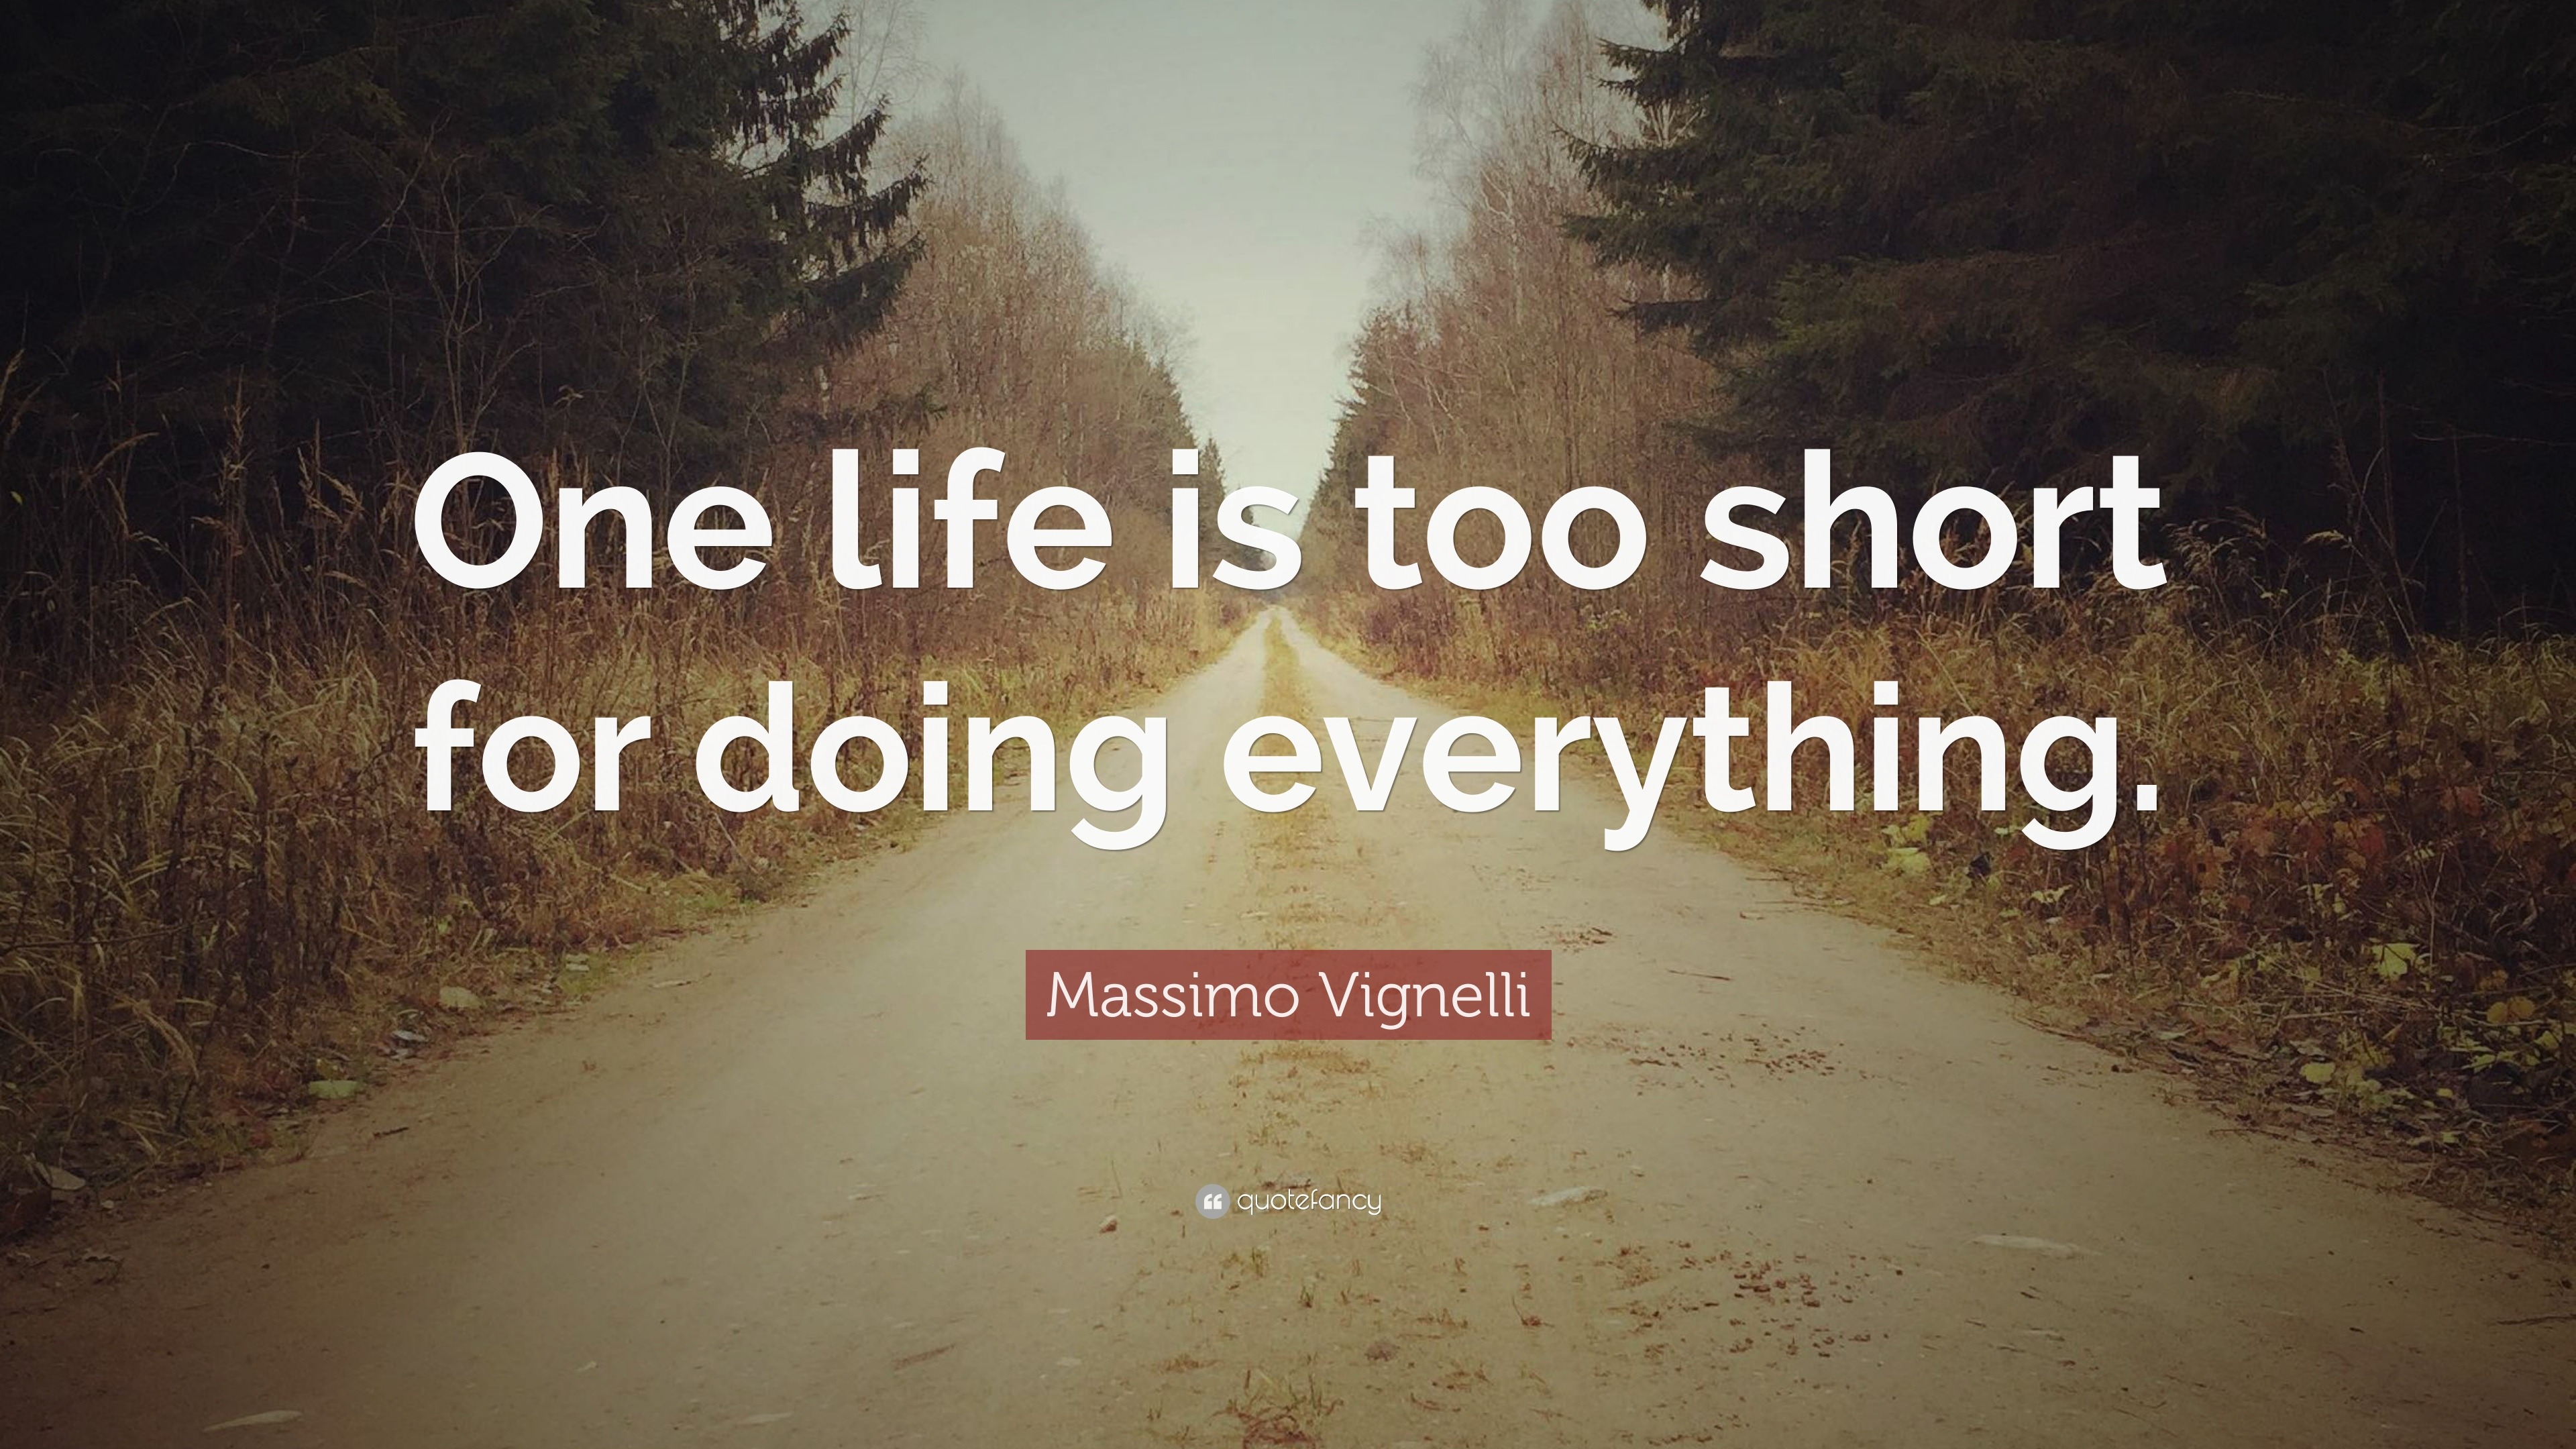 Massimo Vignelli Quote: “One life is too short for doing everything.”